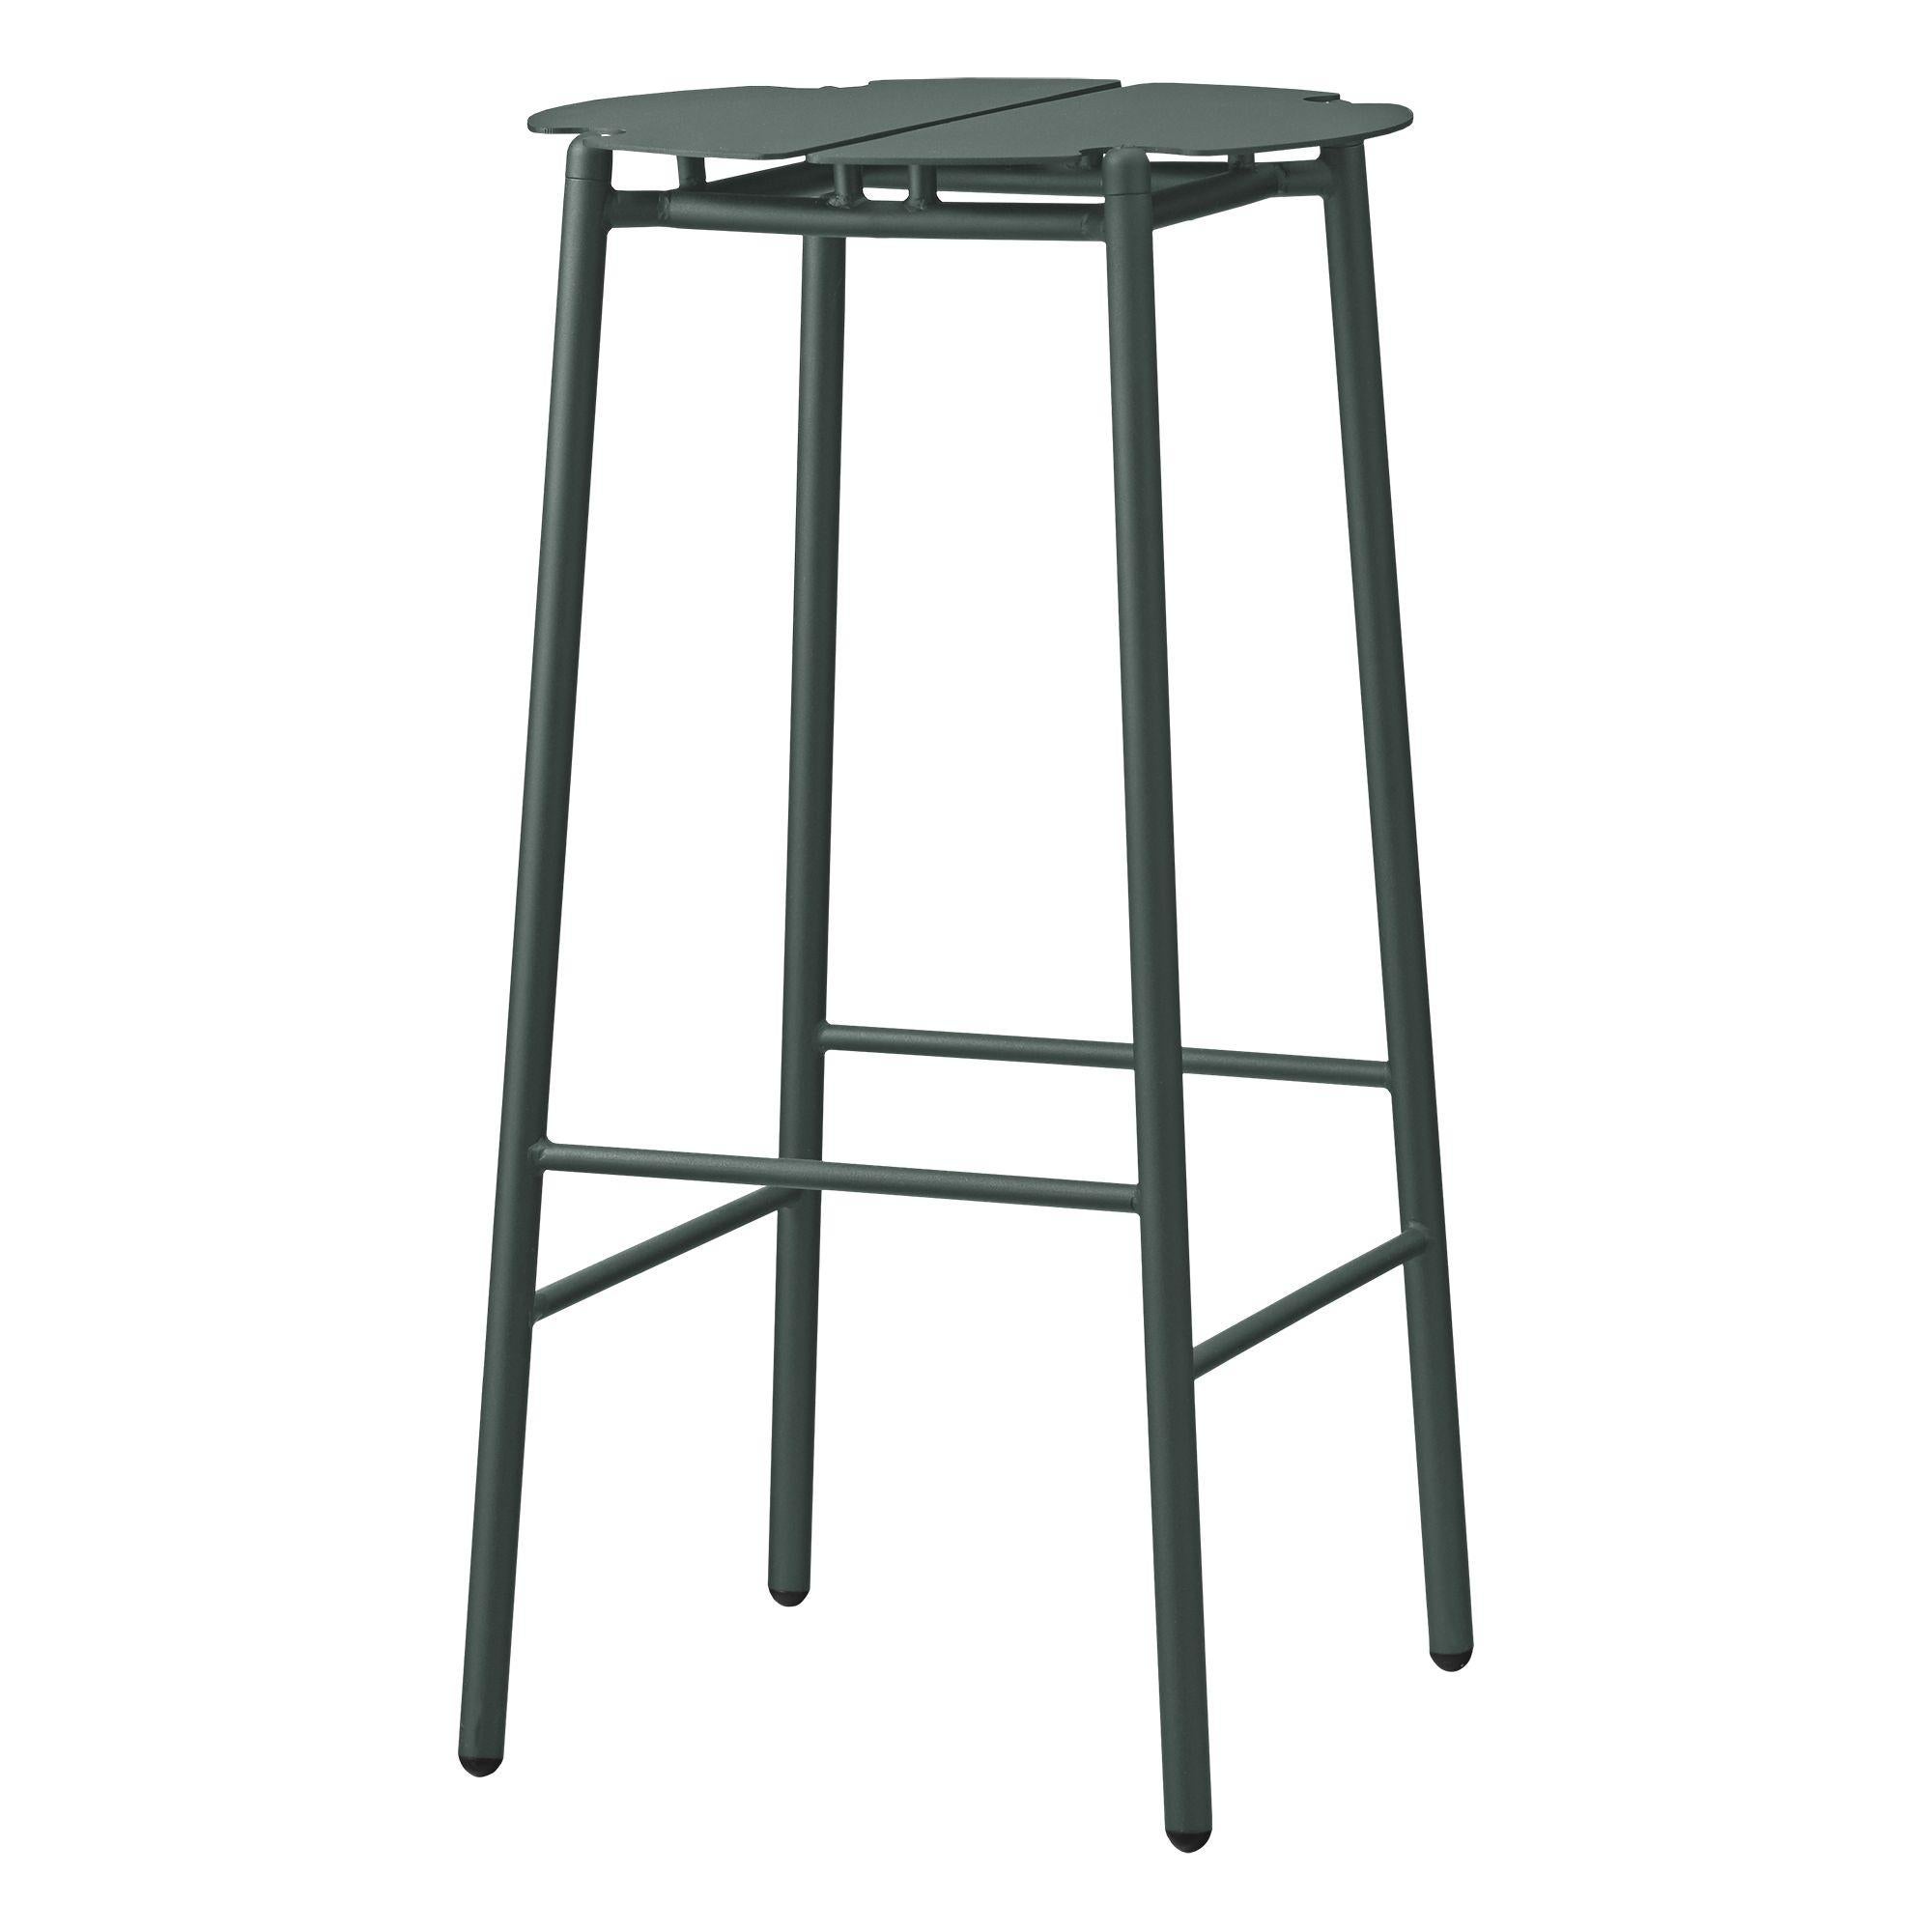 Forest Minimalist bar stool 
Dimensions: Diameter 38 x Height 75 cm 
Materials: Steel w. Matte powder coating & aluminum w. Matte powder coating.
Available in colors: Taupe, bordeaux, forest, ginger bread, black and, black and gold.

Create a